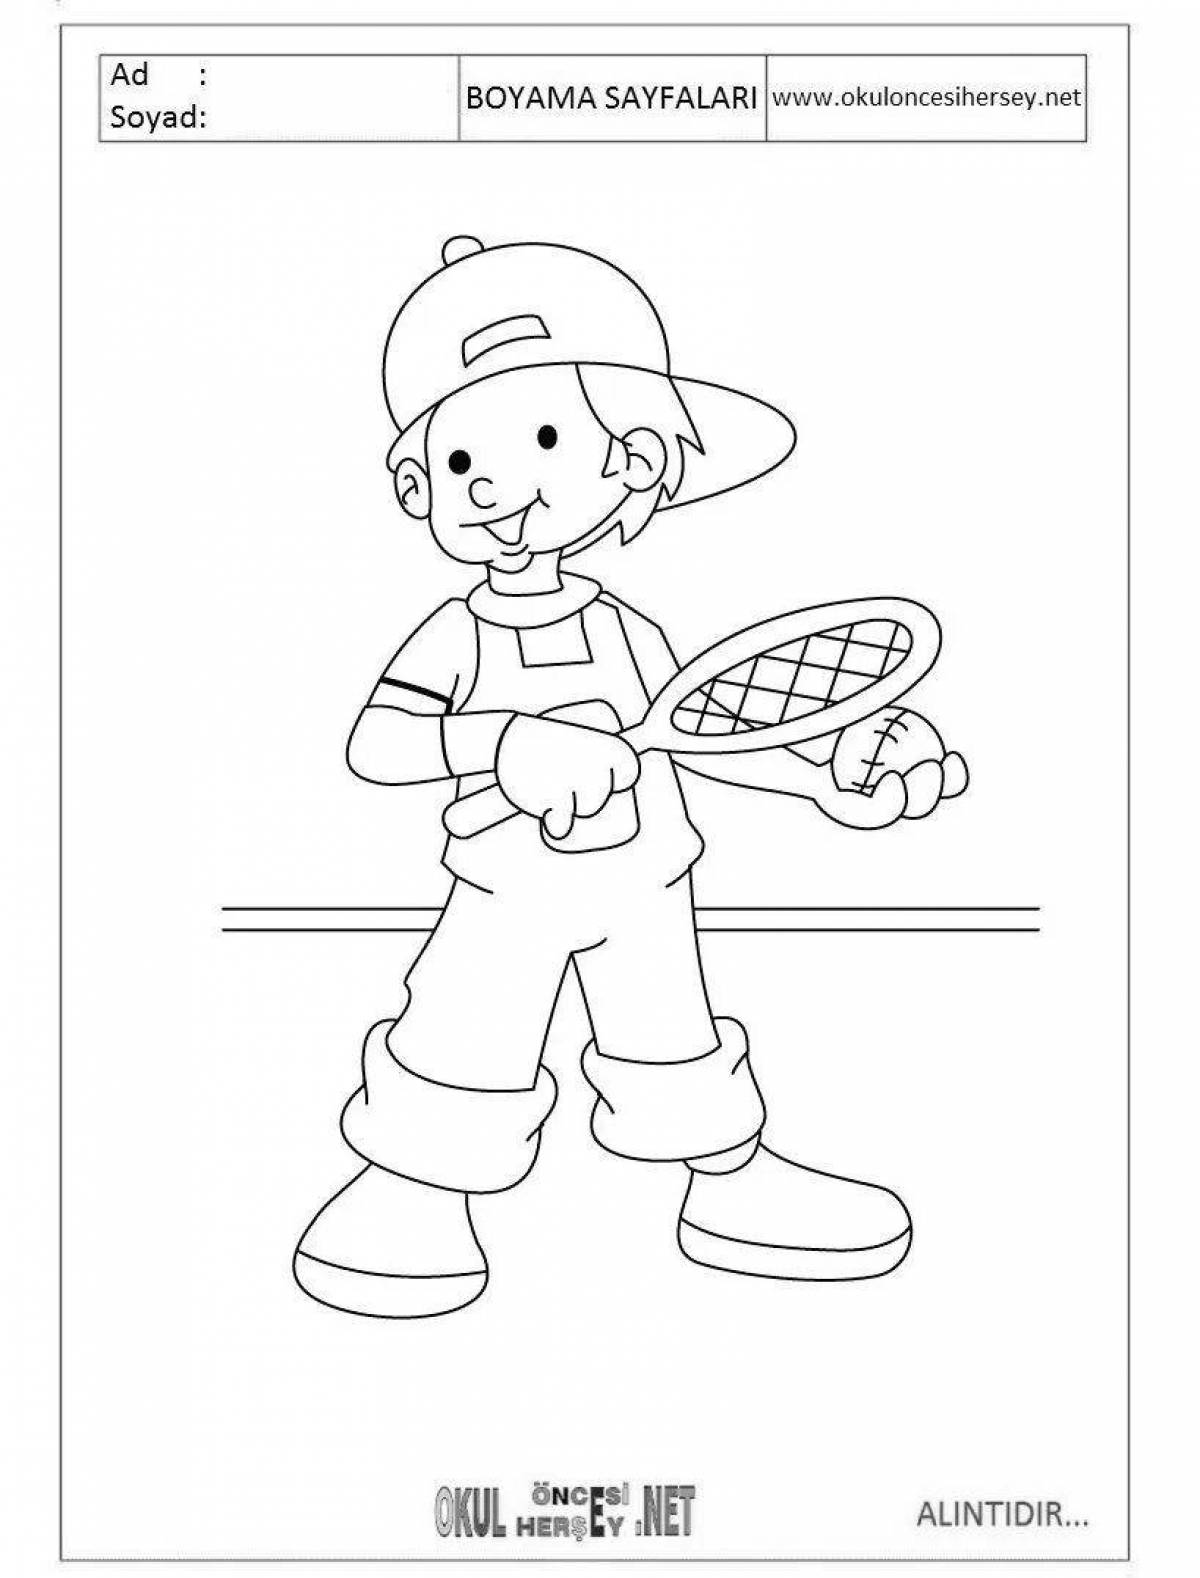 Playful sports coloring book for kids